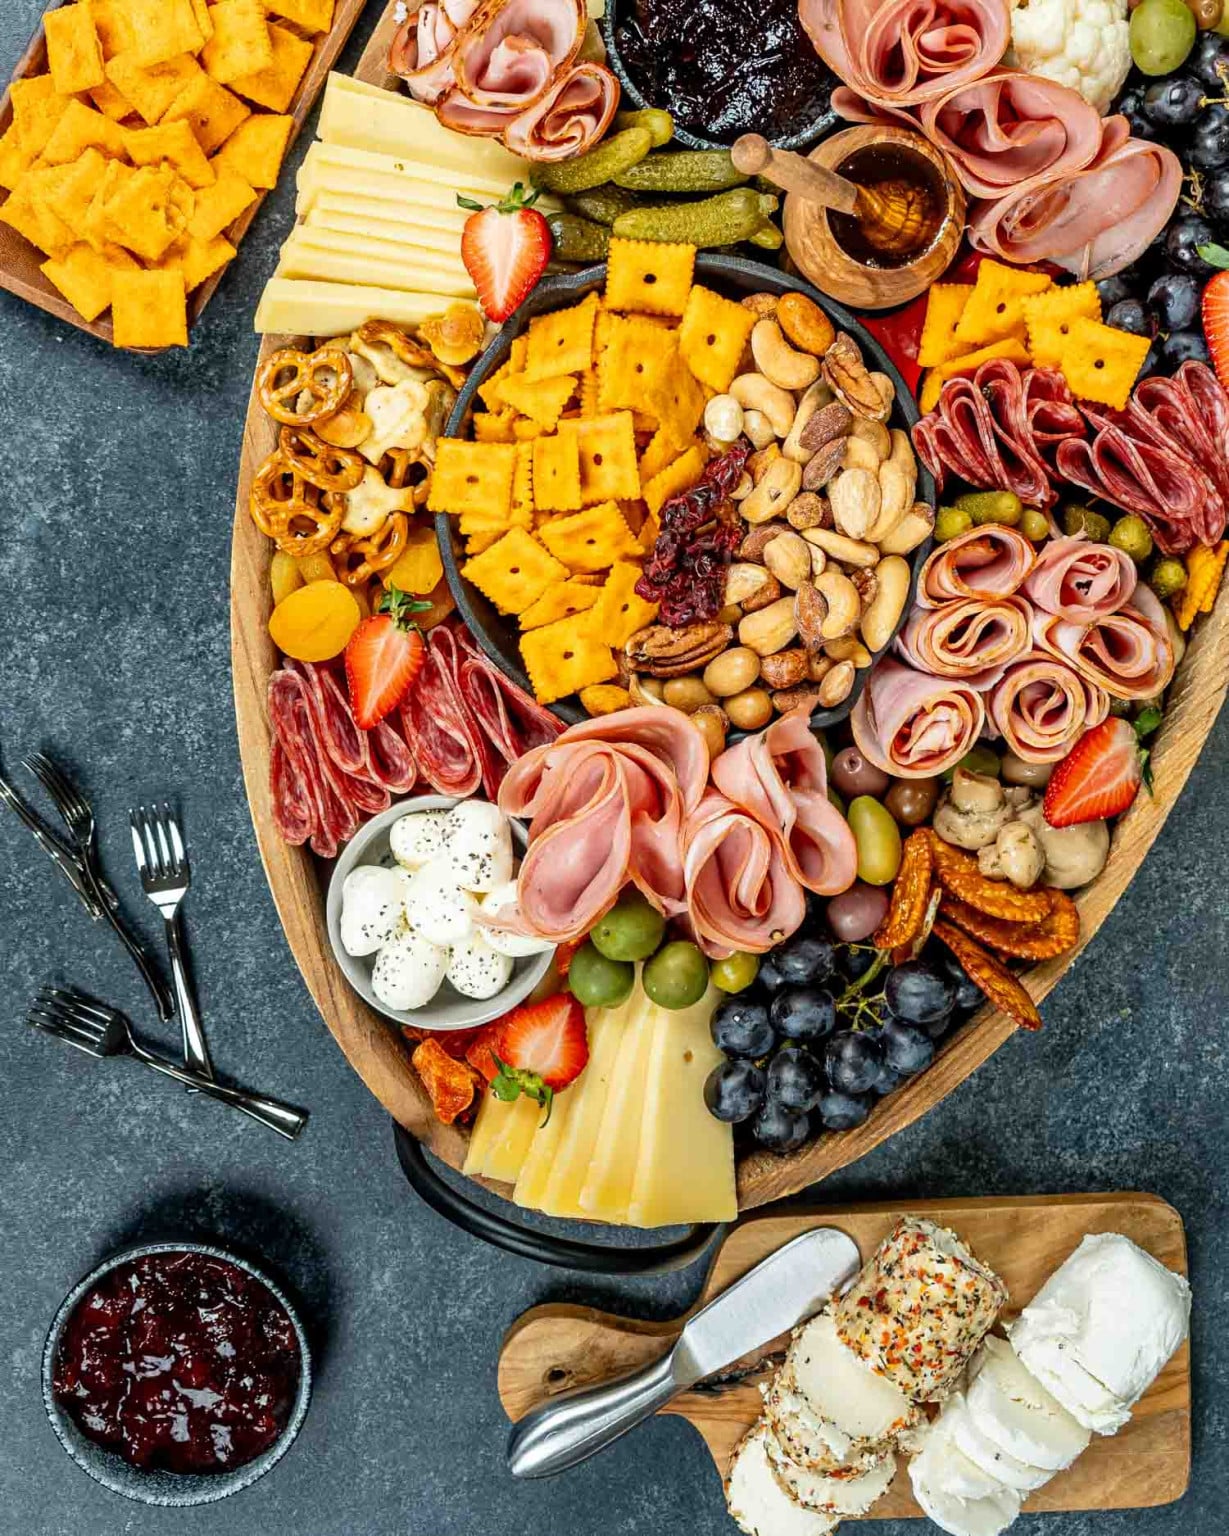 How To Make A Charcuterie Board - Jo Cooks